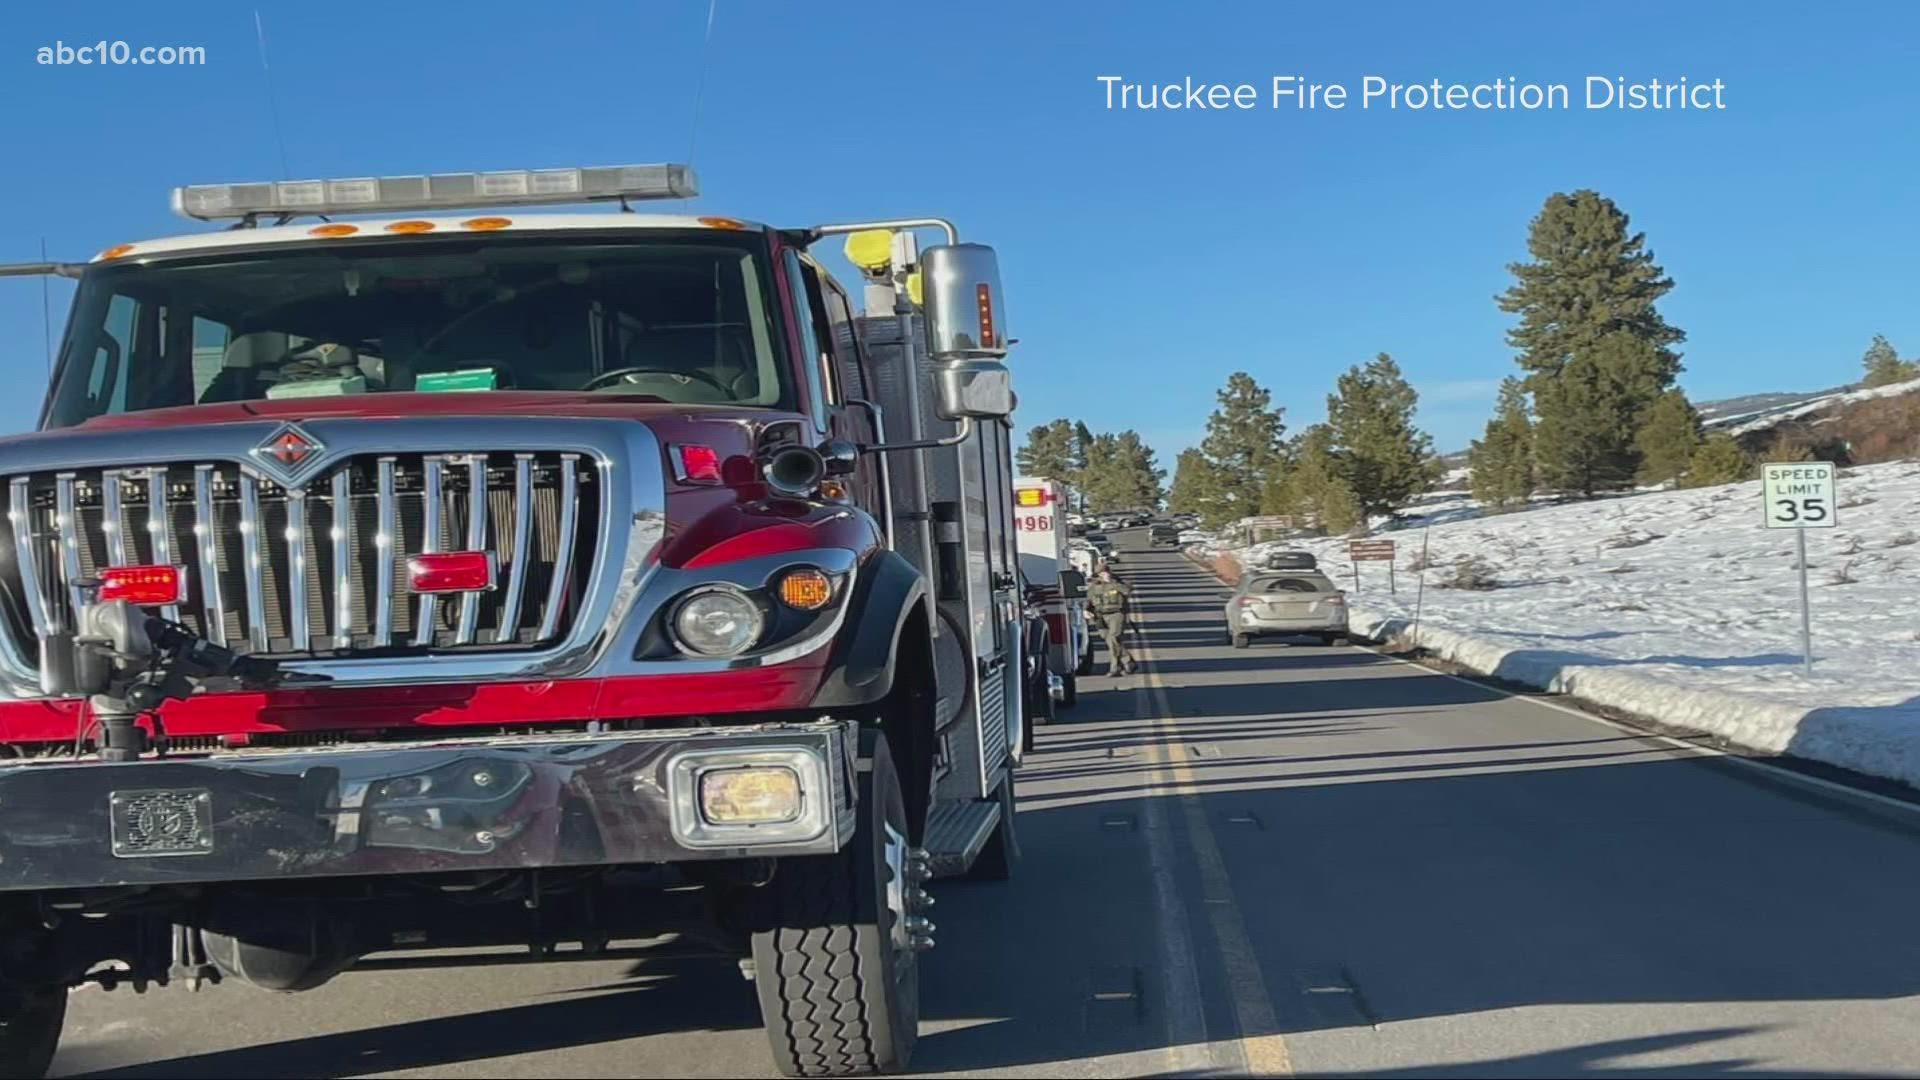 According to a post from the Truckee Fire Protection District, five other people were able to get out of the water, while one person is still missing.